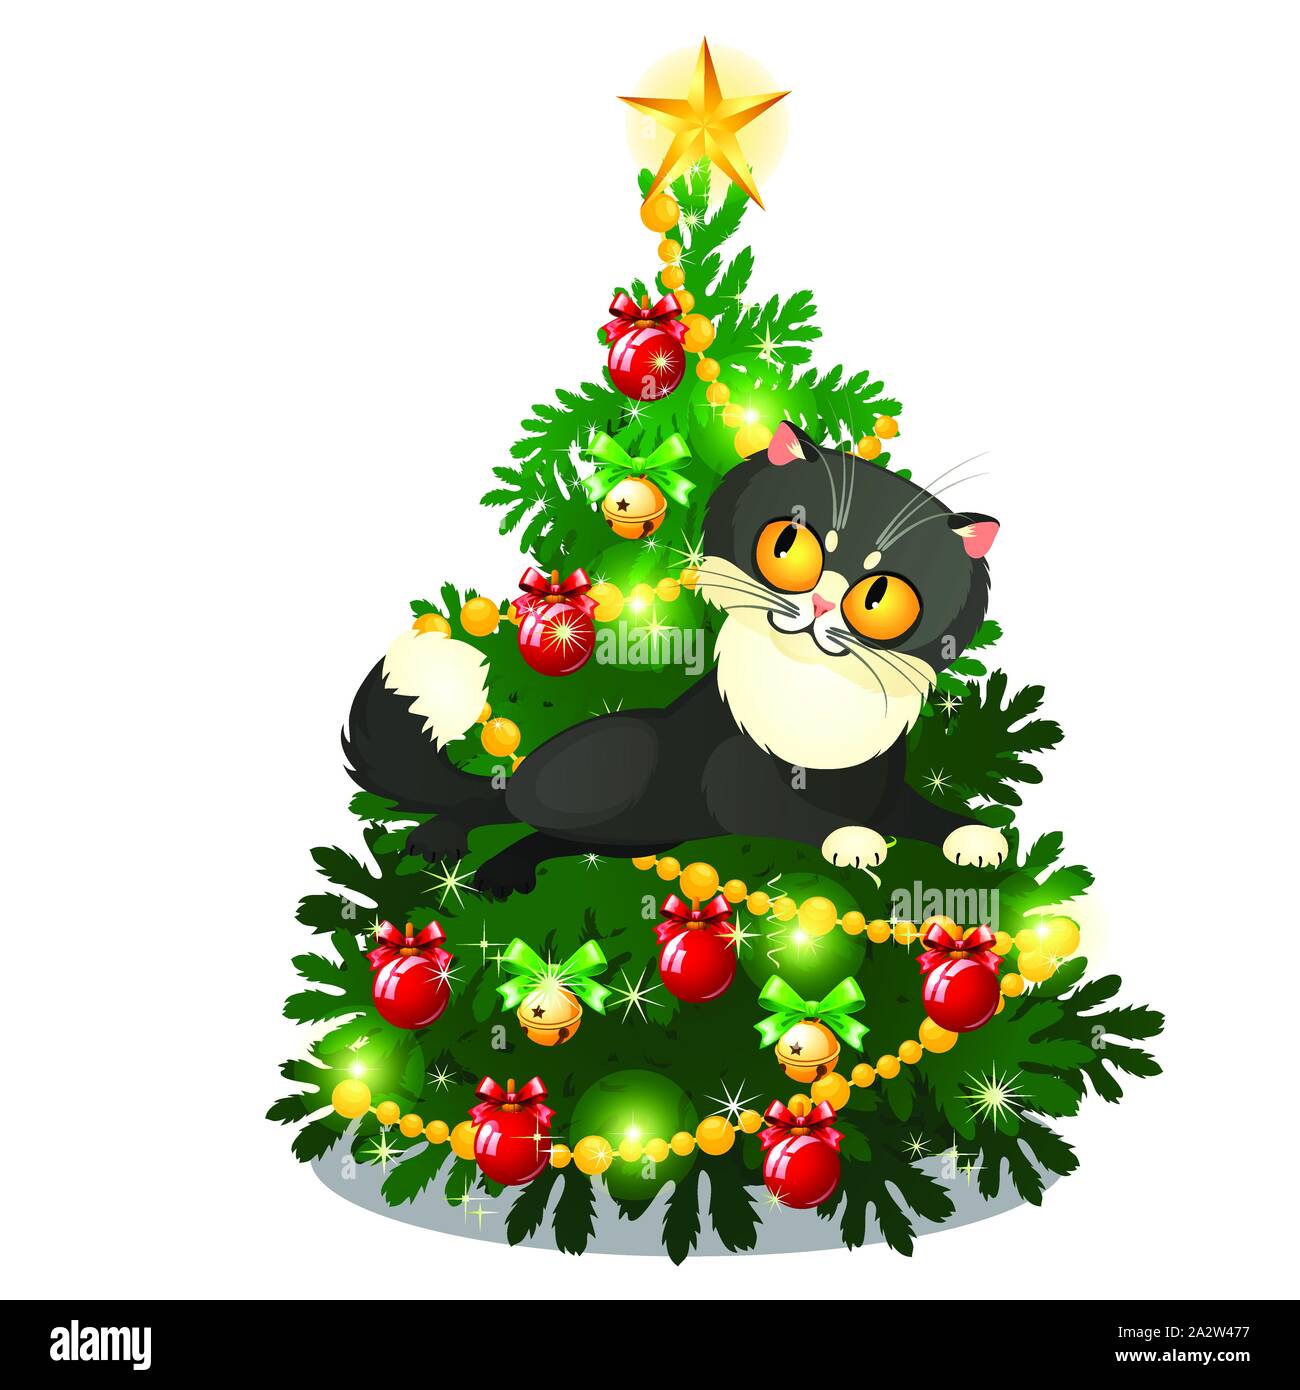 Funny animated cat with yellow eyes jumping in front of Christmas tree isolated on white background. Sketch of festive poster, party invitation Stock Vector